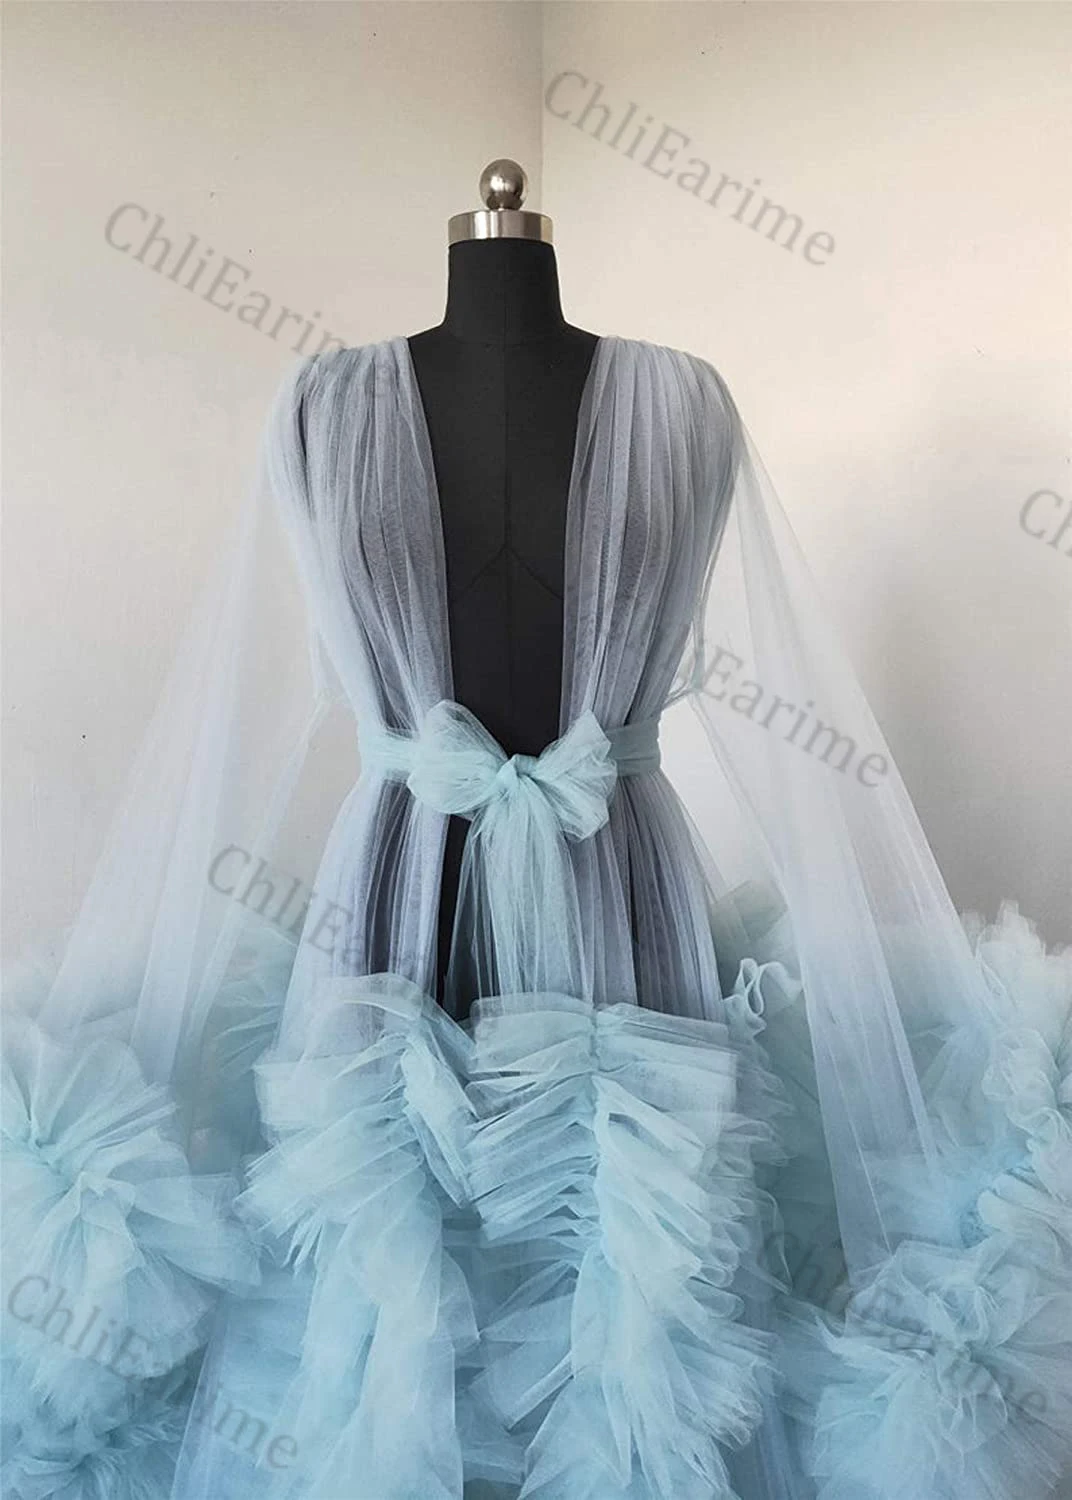 Ladies Dressing Gown Perspective Sheer Long Tulle Robe Puffy Pregnancy Photoshoot